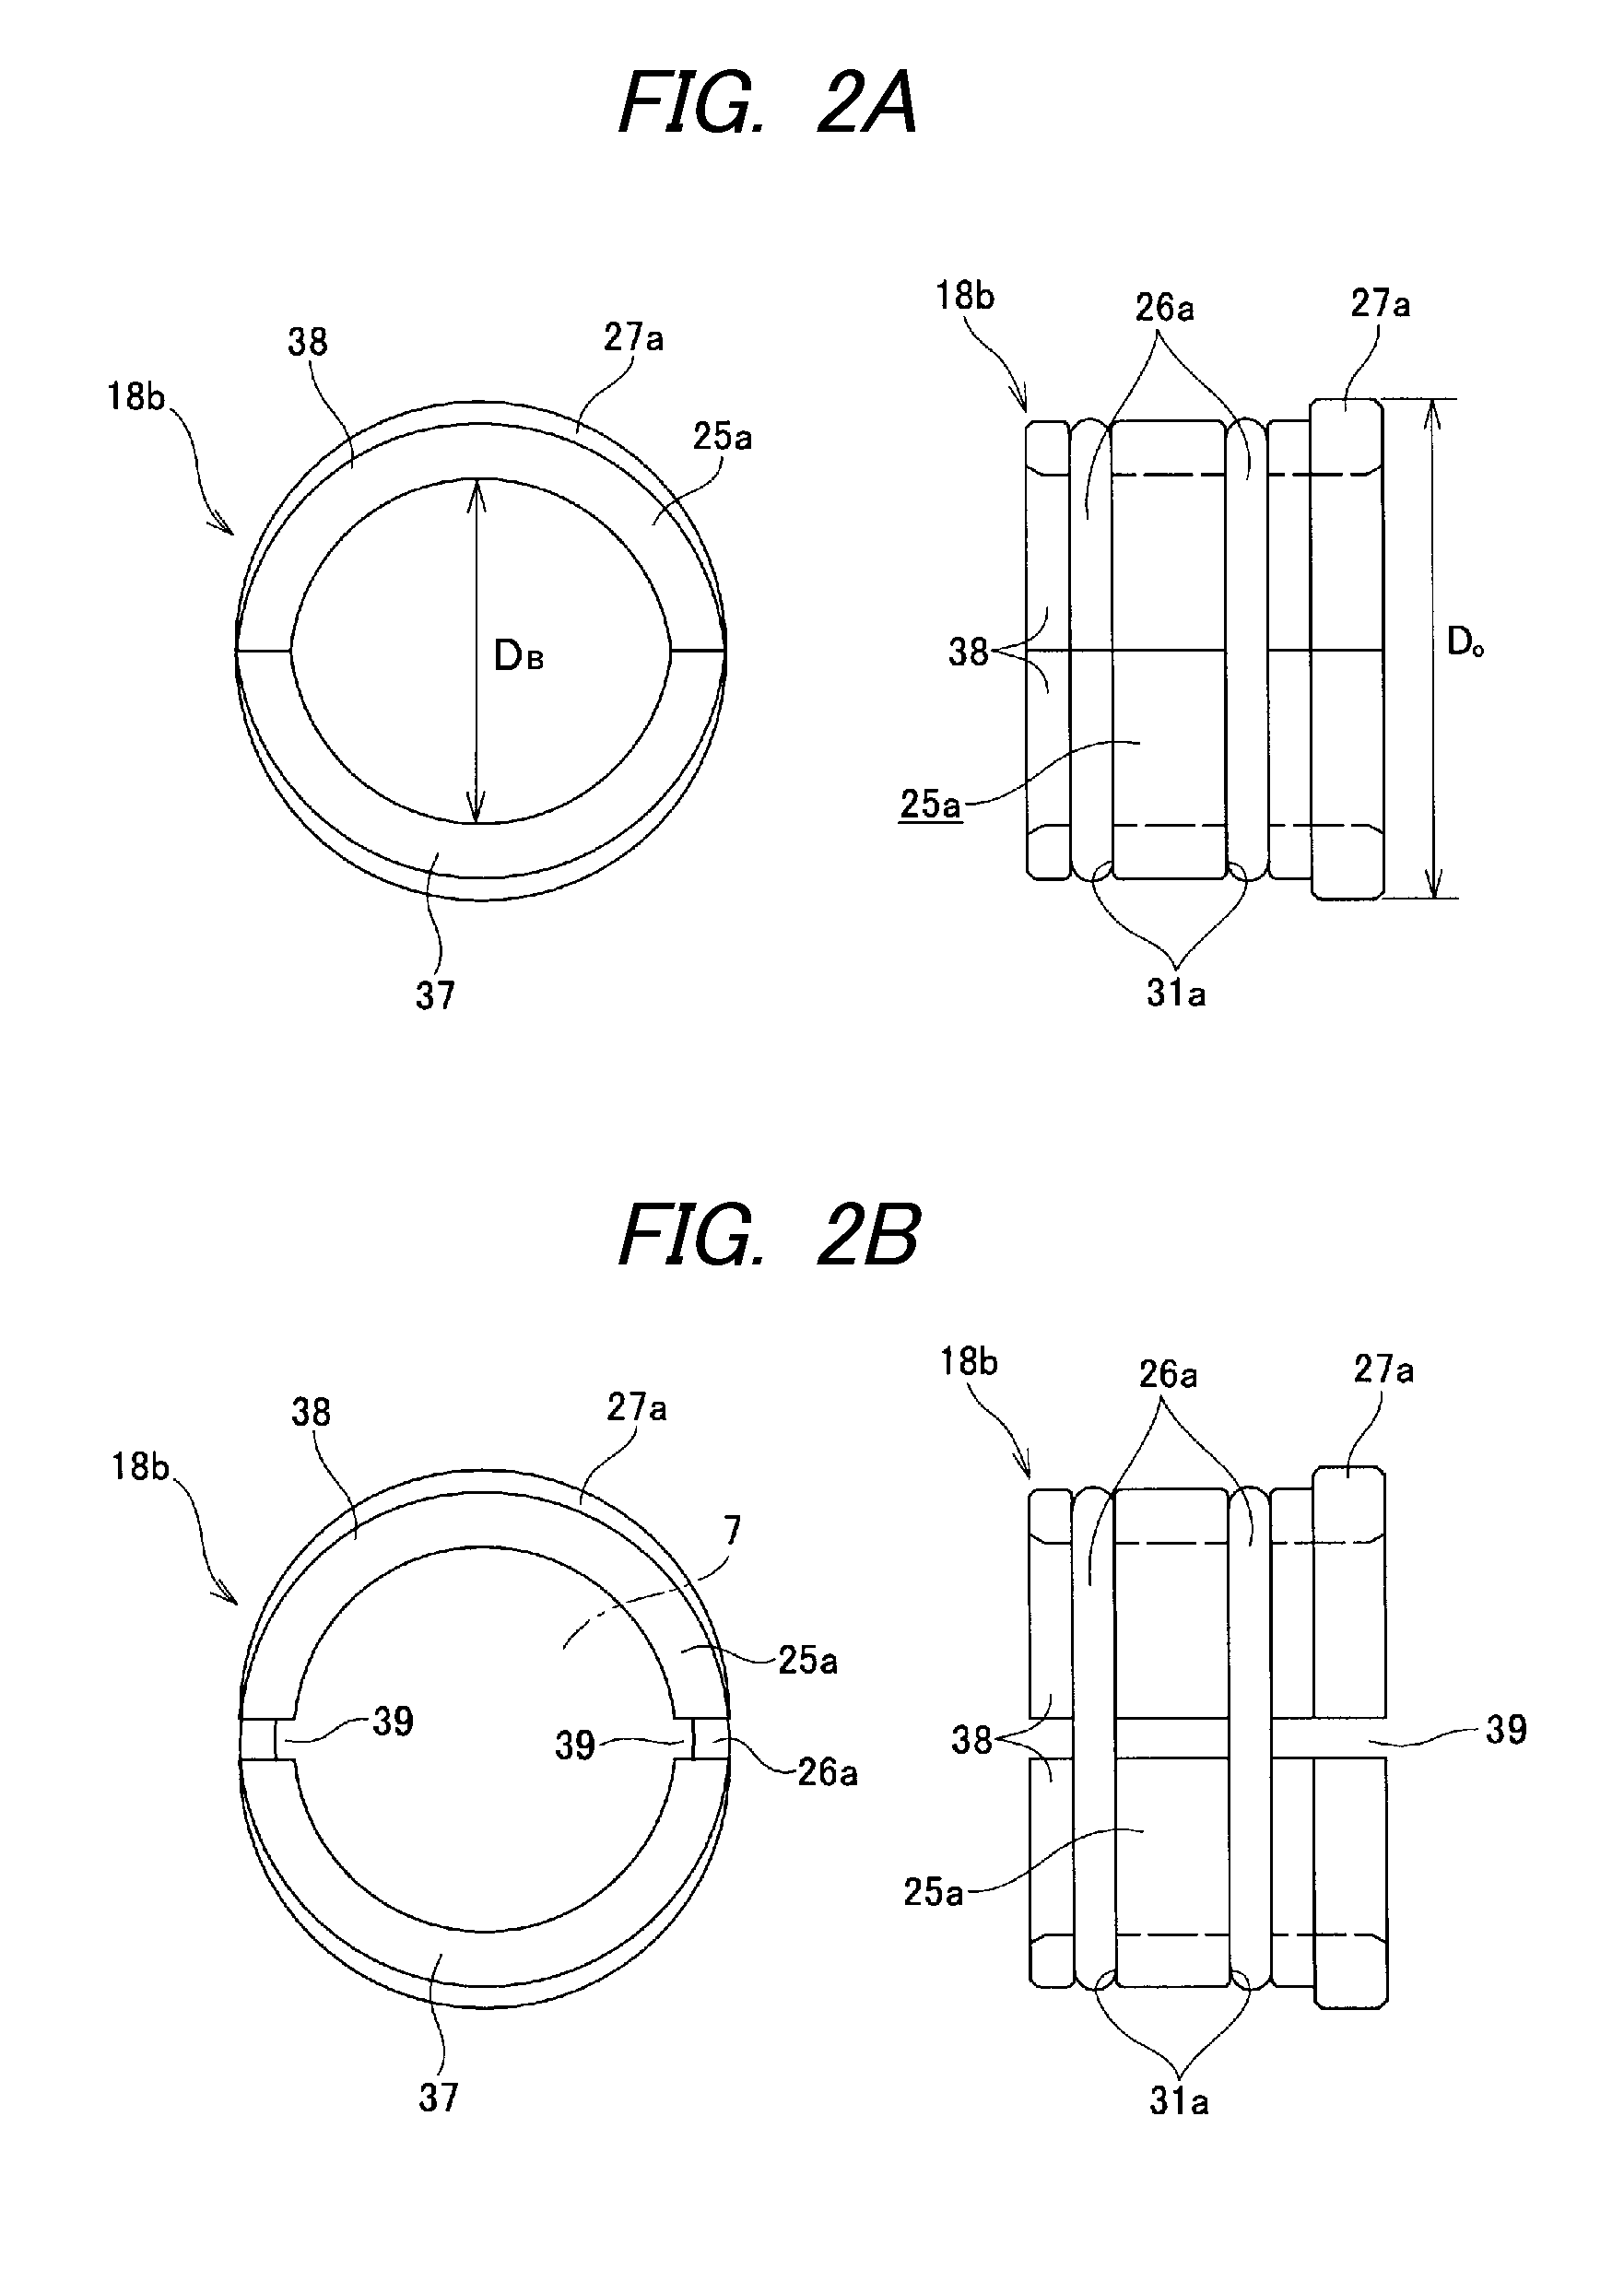 Guide bush and rack-and-pinion steering gear unit